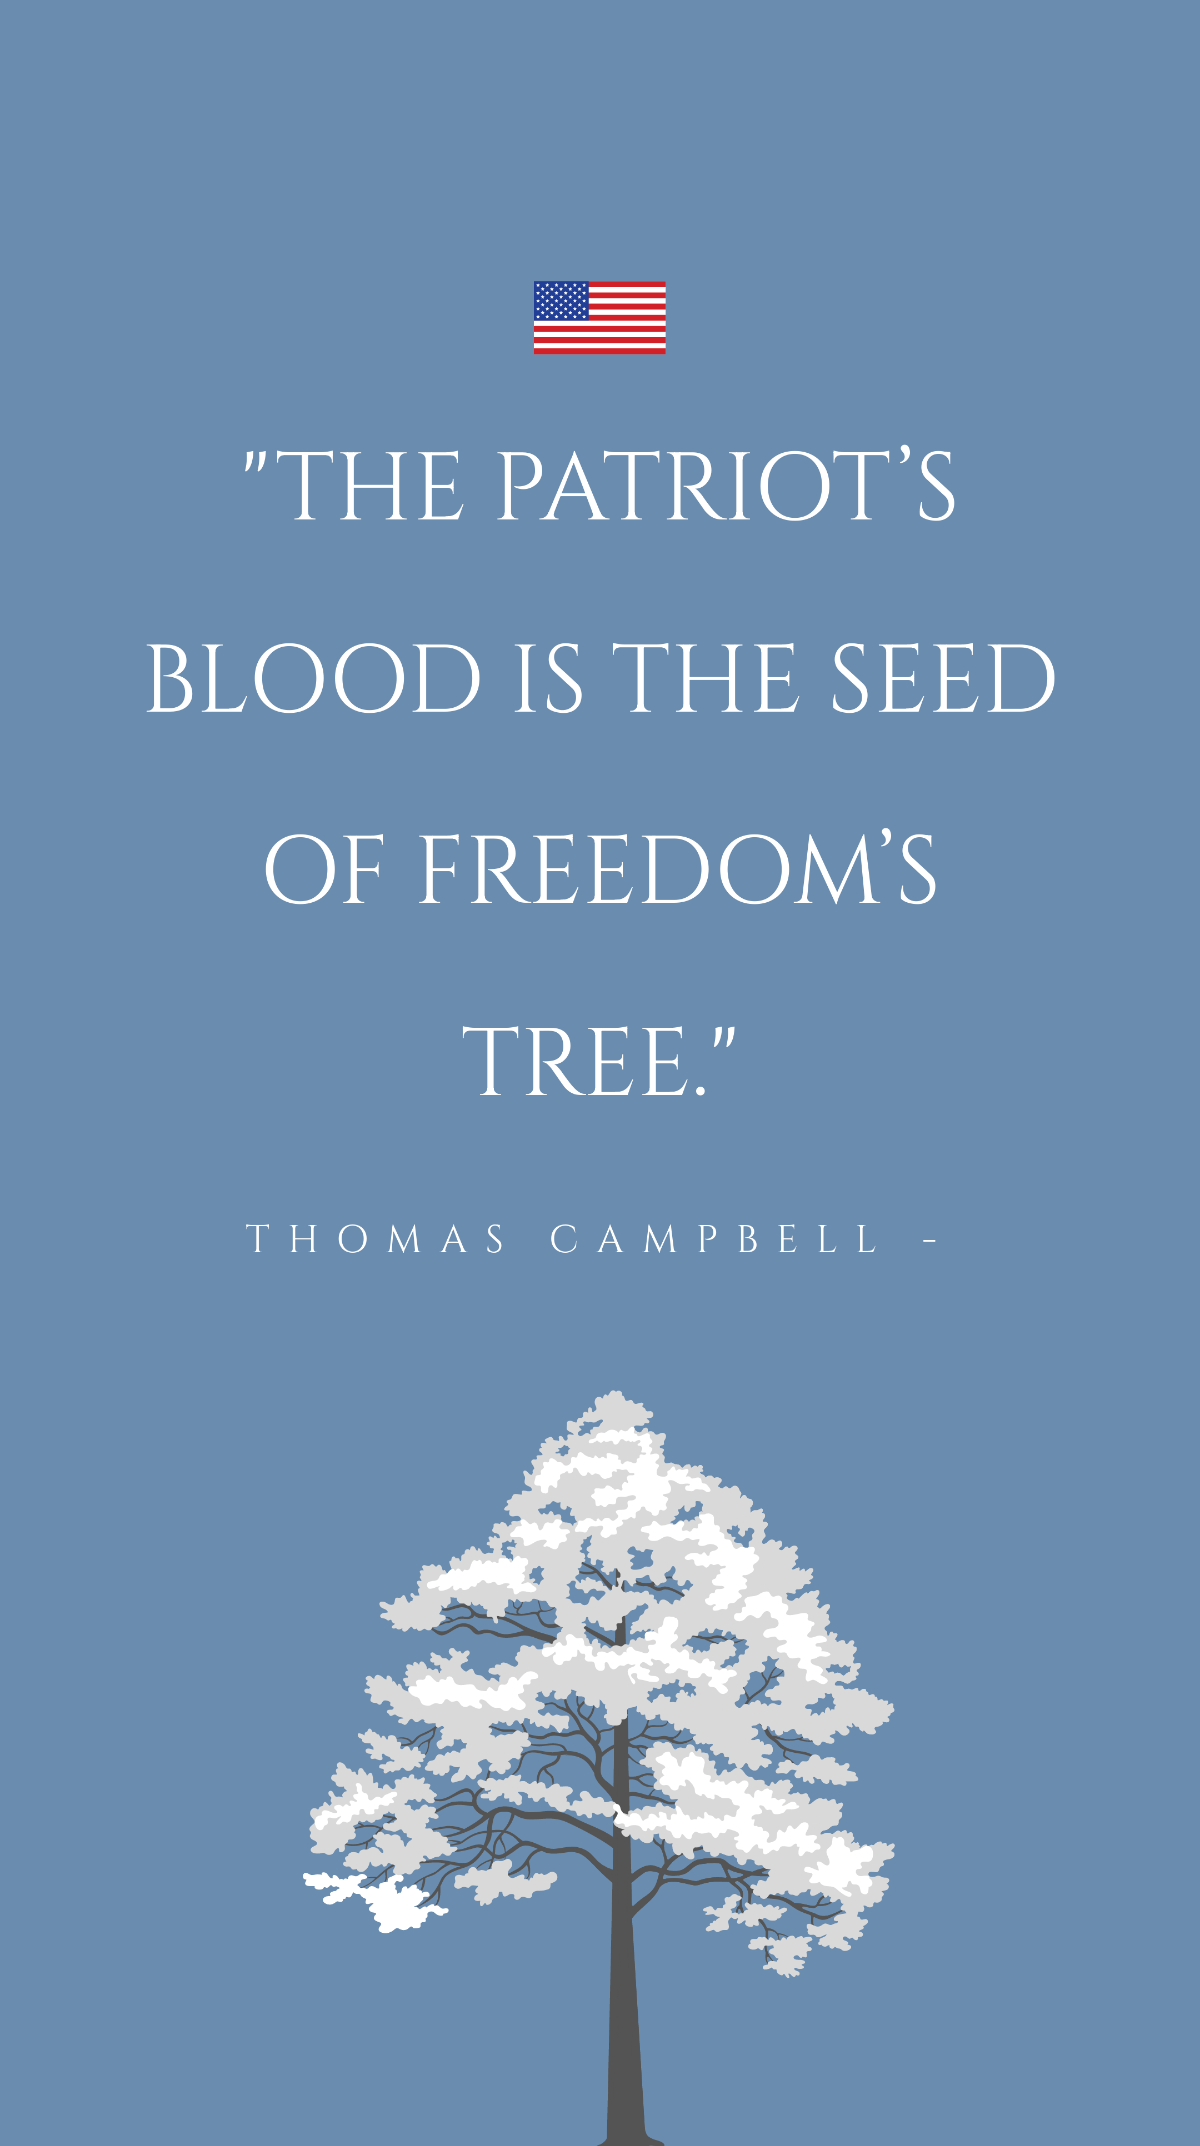 Thomas Campbell - The patriot’s blood is the seed of freedom’s tree.